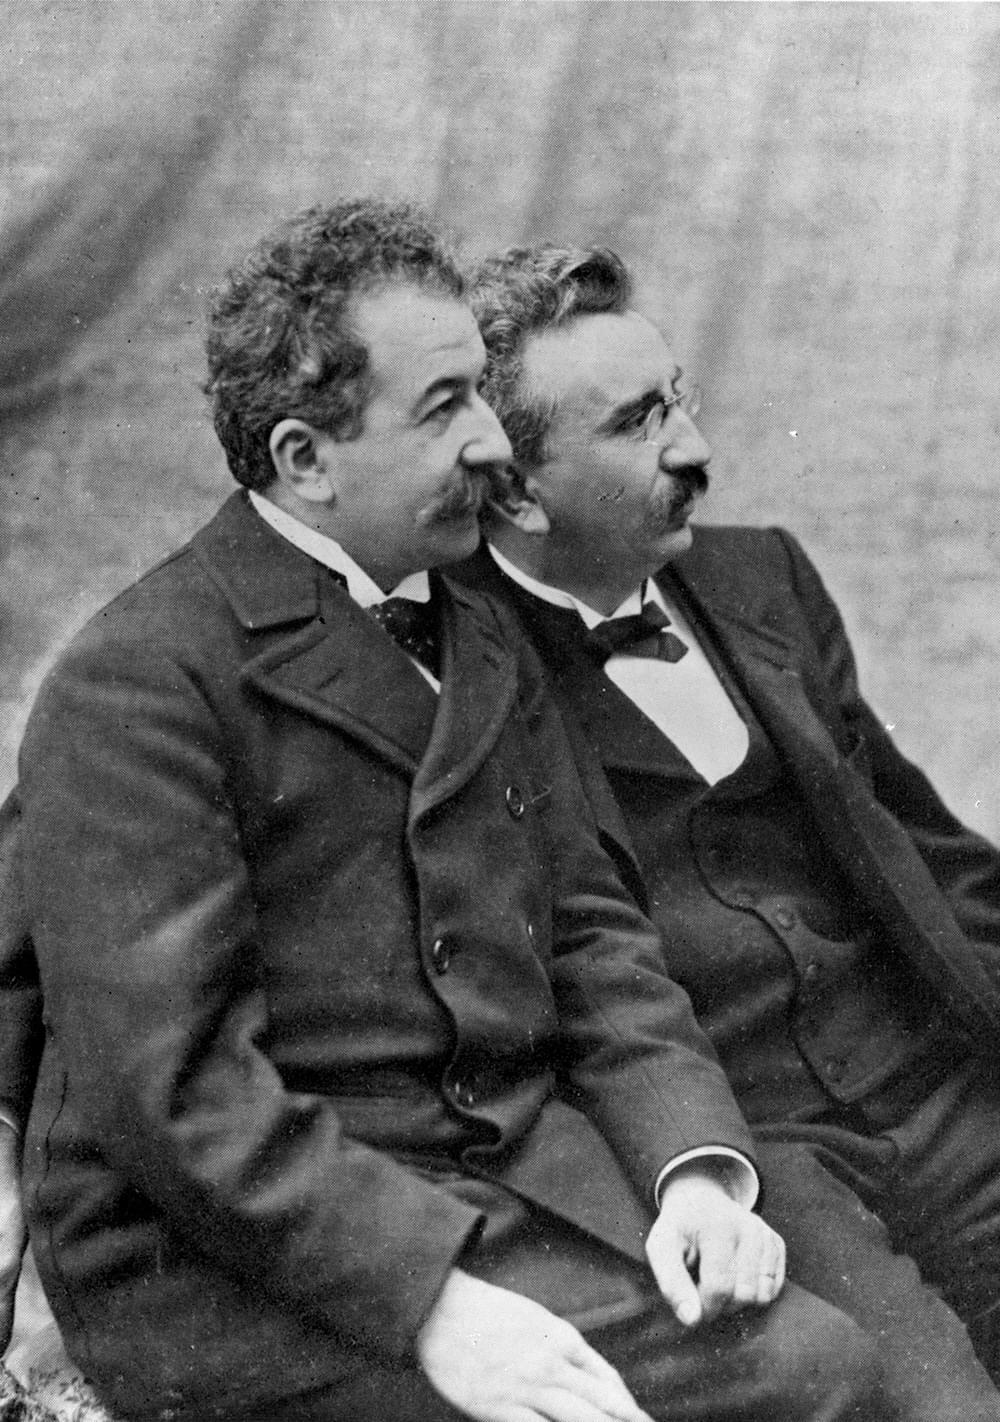 Auguste (left) and Louis (right) Lumière